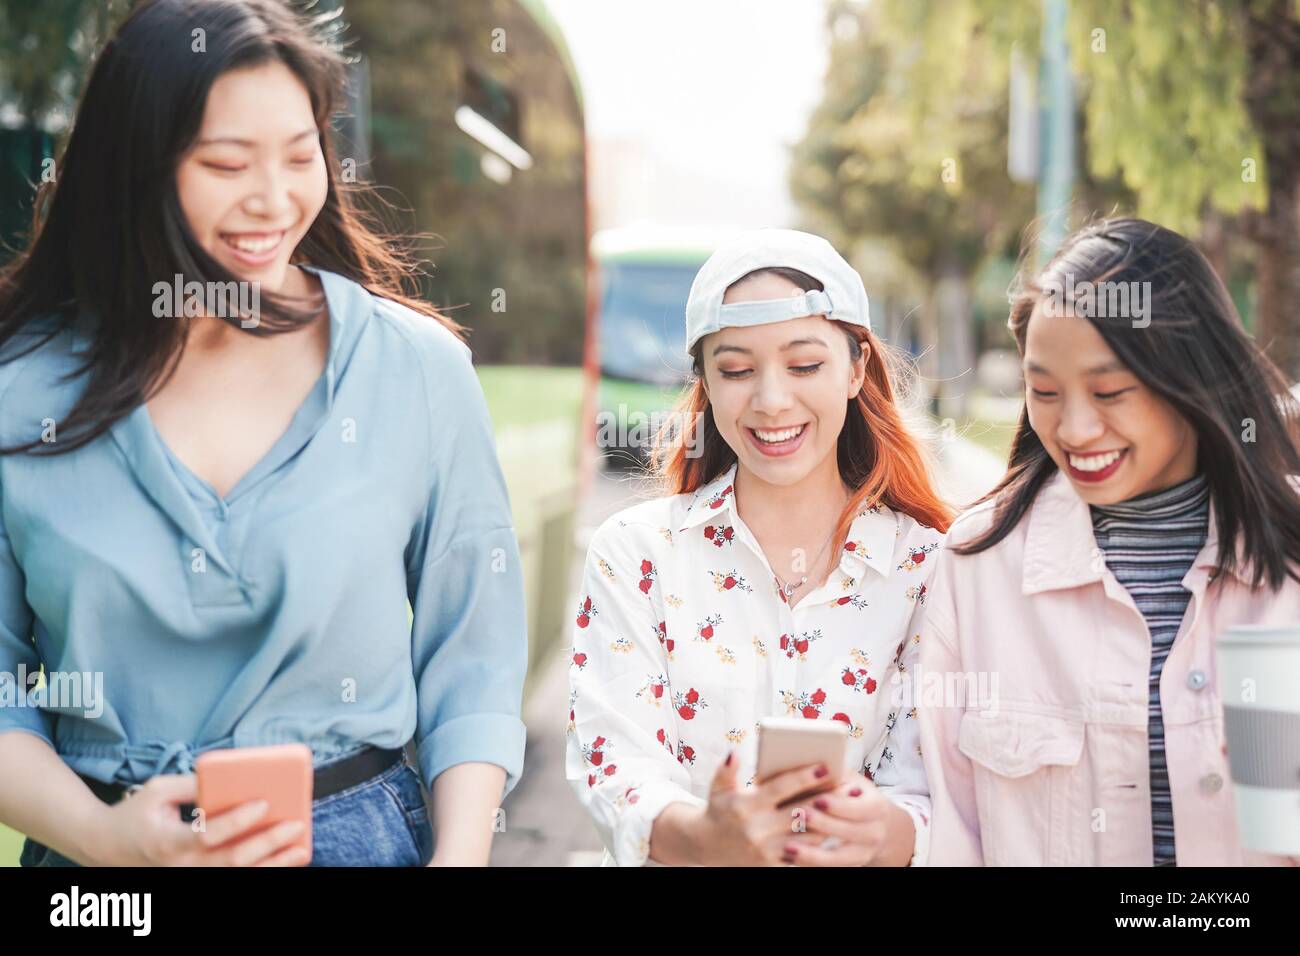 https://c8.alamy.com/comp/2AKYKA0/happy-asian-girlfriends-walking-in-the-city-while-watching-on-mobile-smartphones-young-teen-girls-having-fun-with-new-social-media-apps-2AKYKA0.jpg